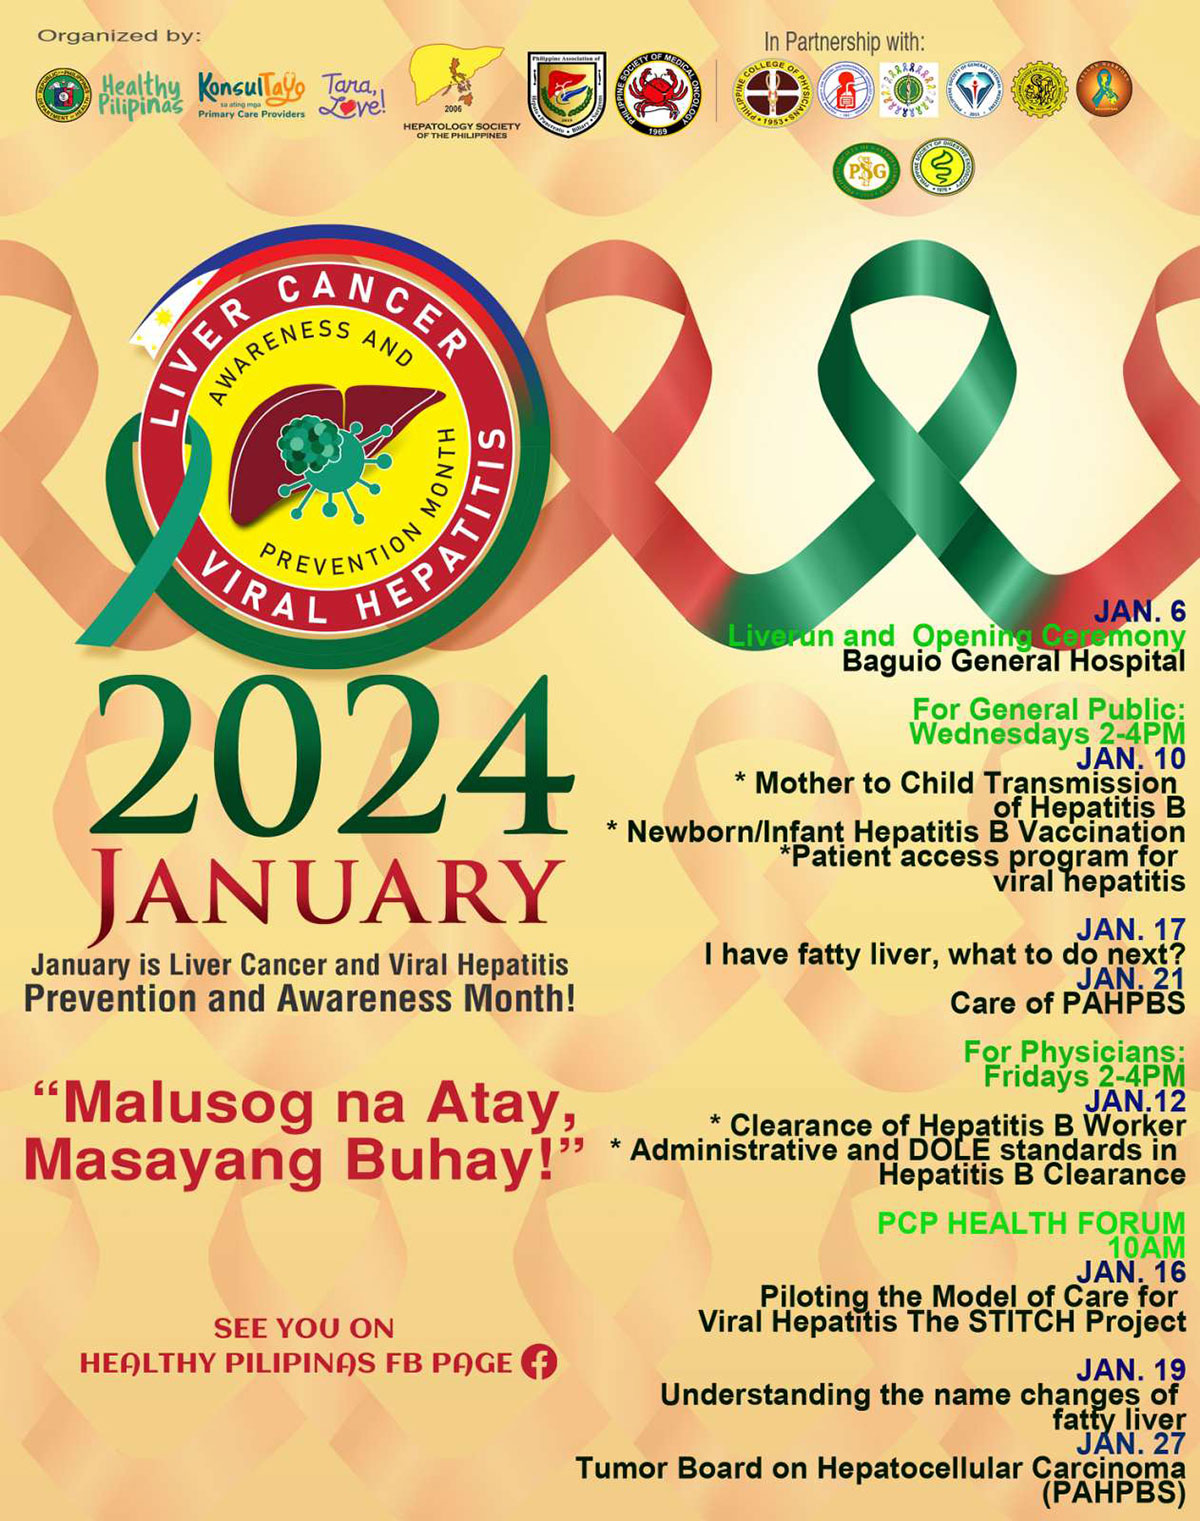 LIVER CANCER AND VIRAL HEPATITIS AWARENESS AND PREVENTION MONTH 2024